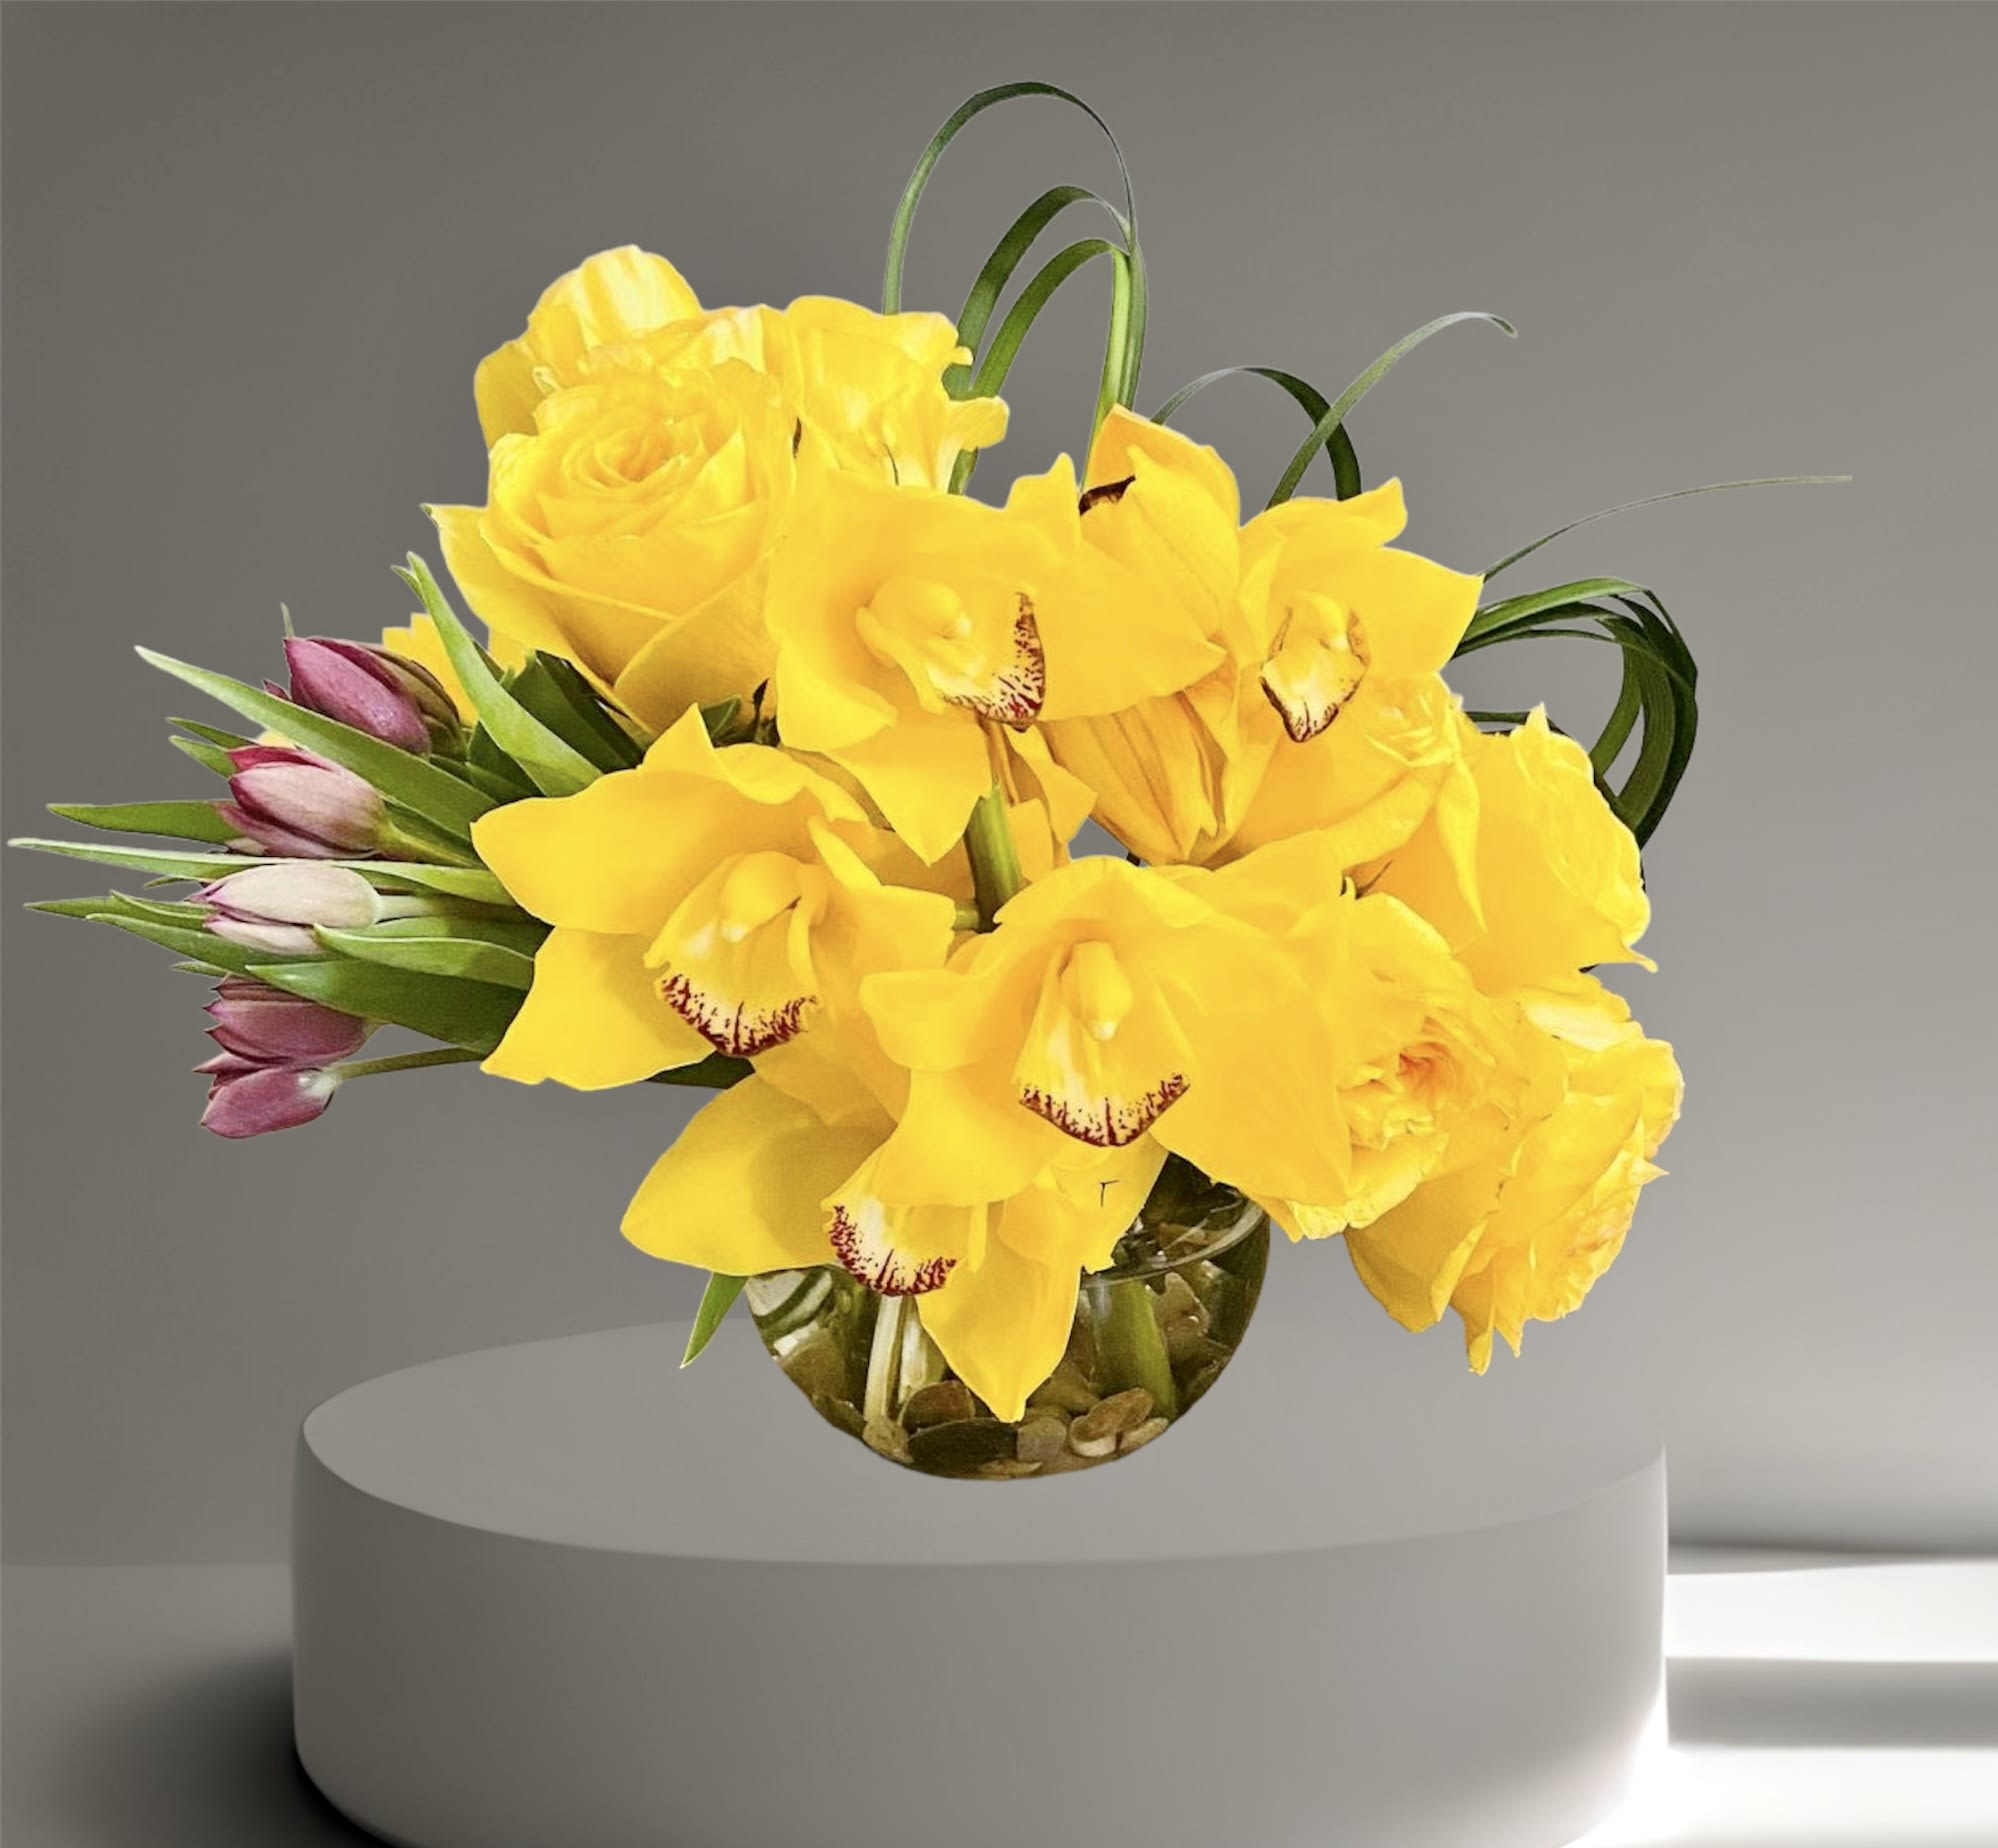 Sunburst - A bright, happy arrangement of roses, tulips, and orchids. Arranged in a glass bowl accented with river rocks and lily grass. The perfect pick-me-up or cheery gift!